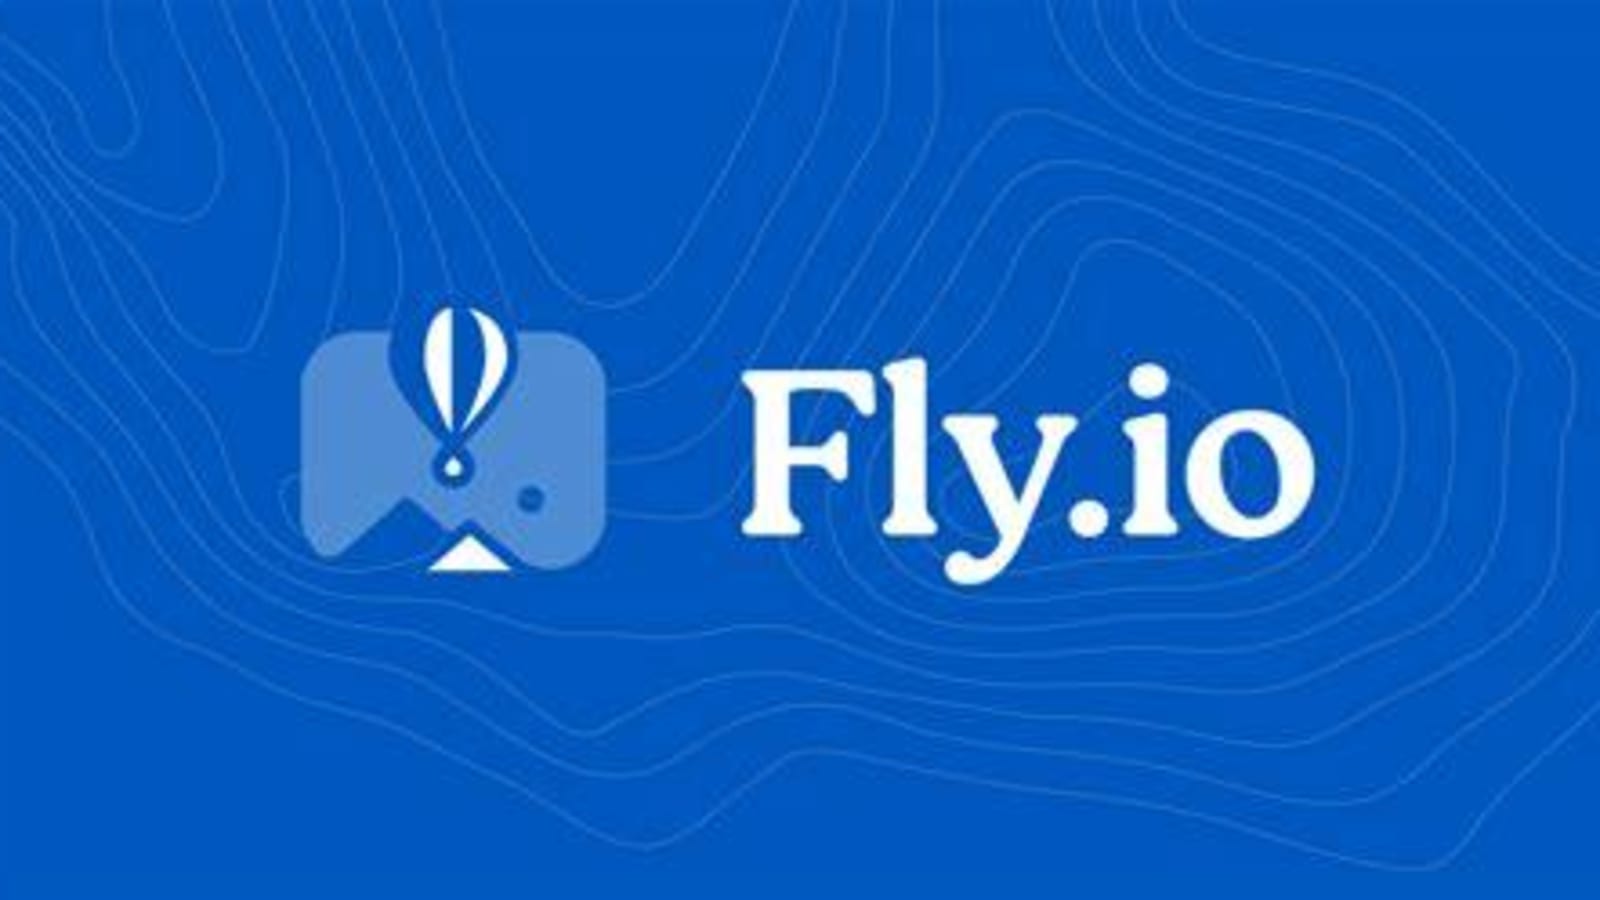 About: FlyOrDie.io - small fly (iOS App Store version)